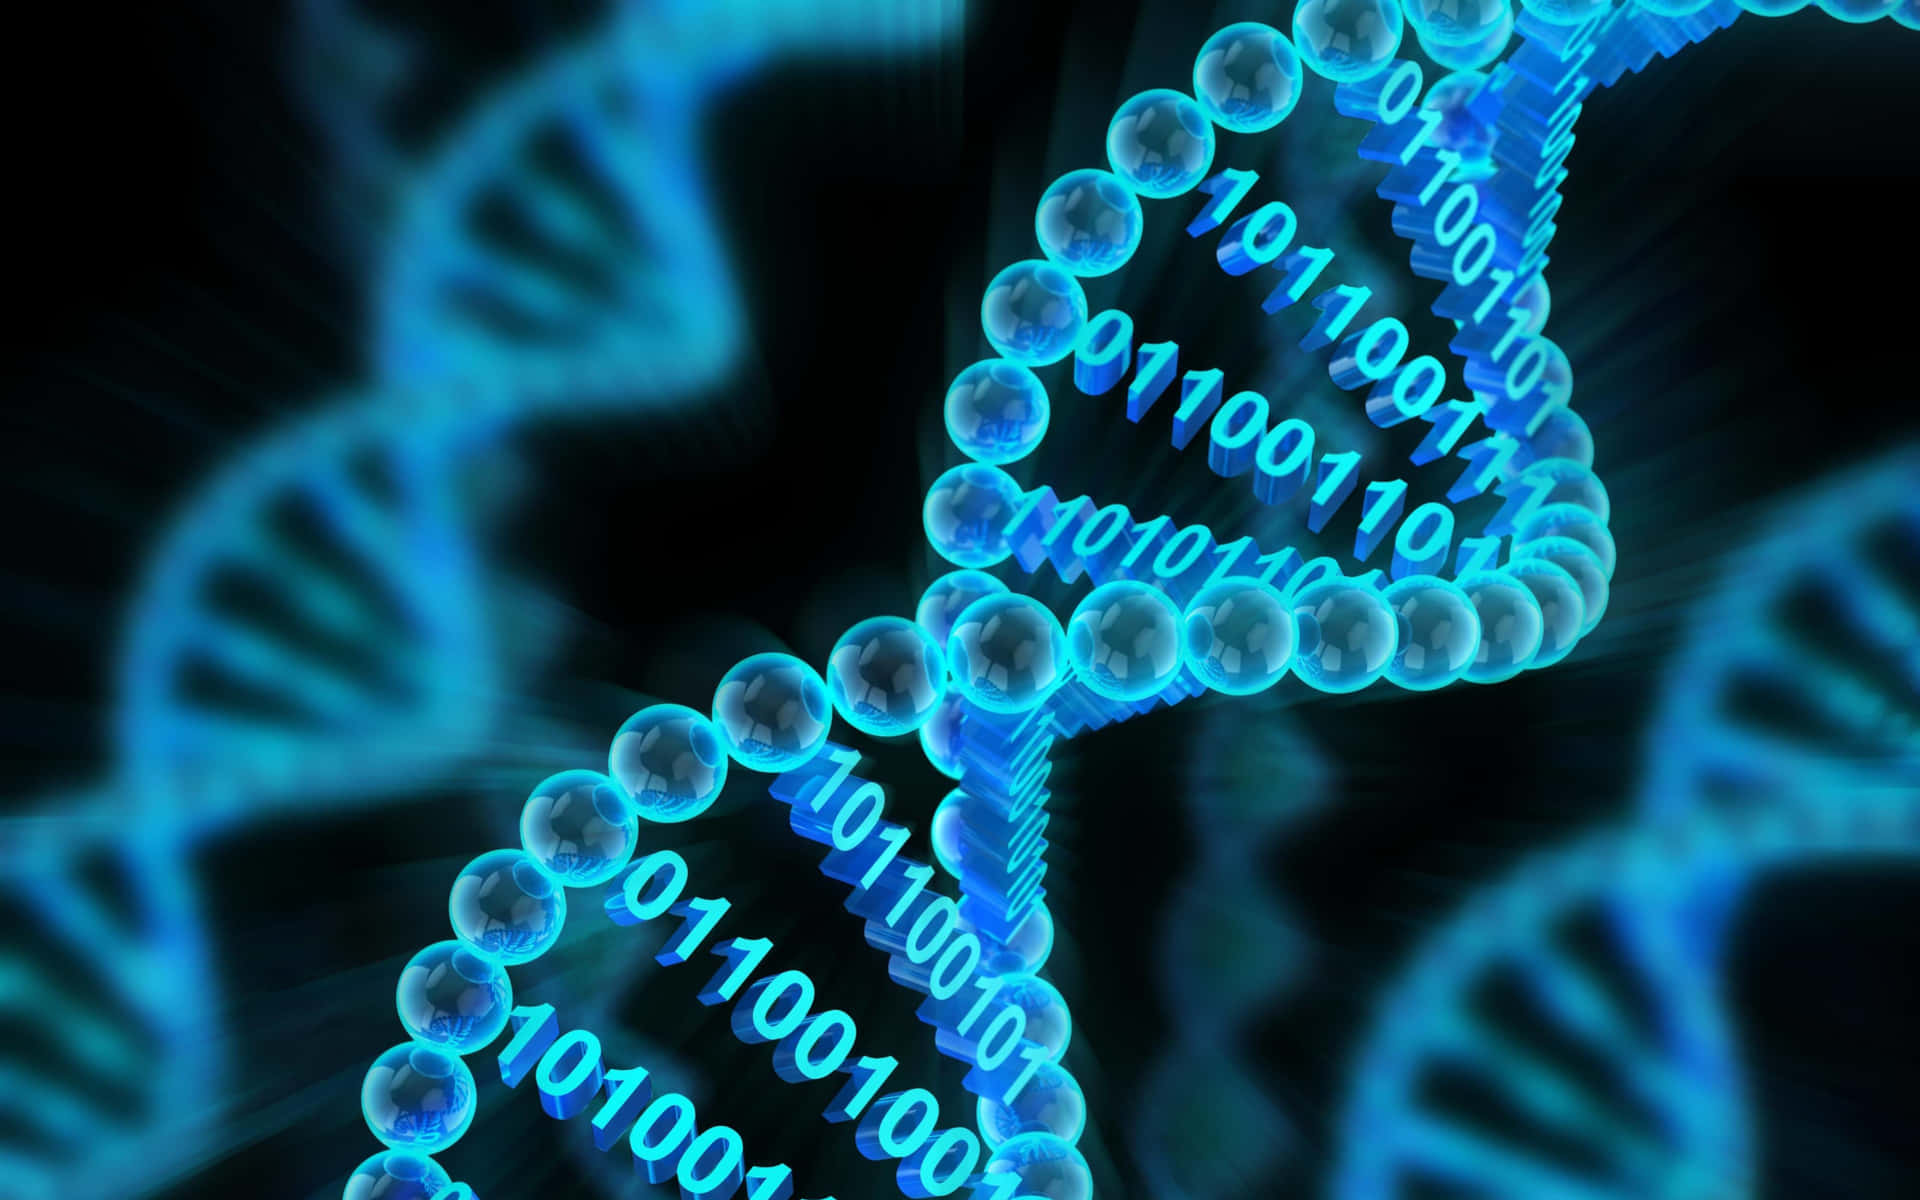 A Blue Dna Strand With A Number On It